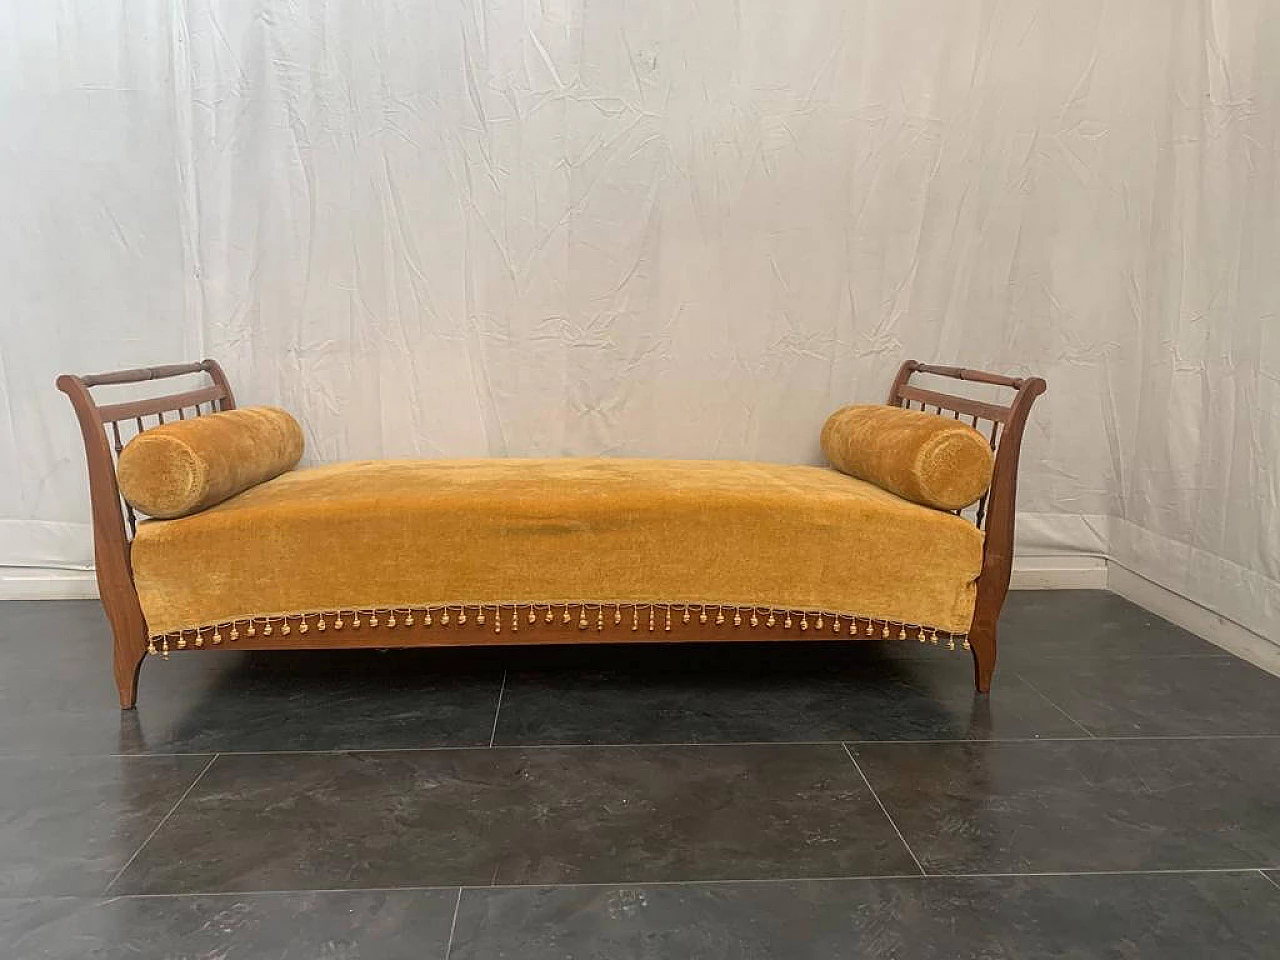 Cherry daybed wood sofa with yellow cover, early 20th century 1116257